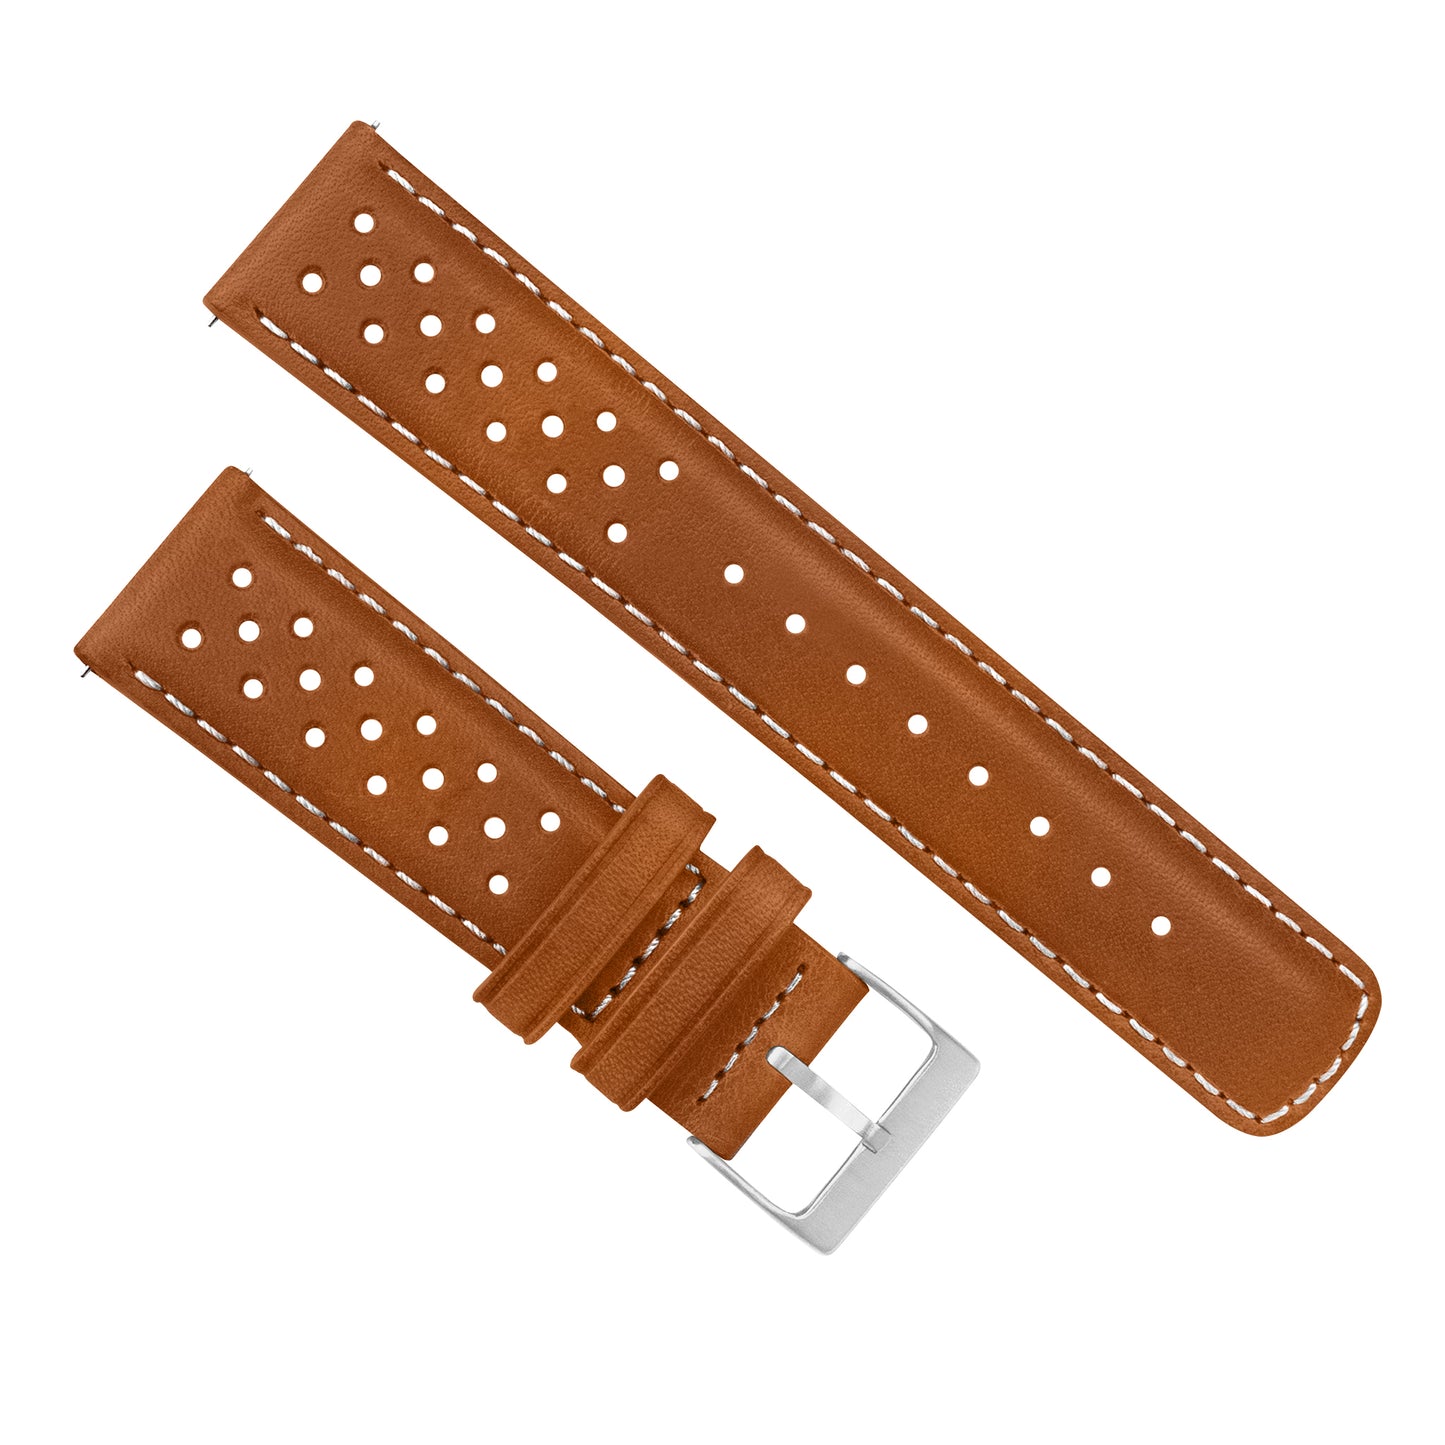 Samsung Galaxy Watch Active Racing Horween Leather Caramel Brown Linen Stitch Watch Band